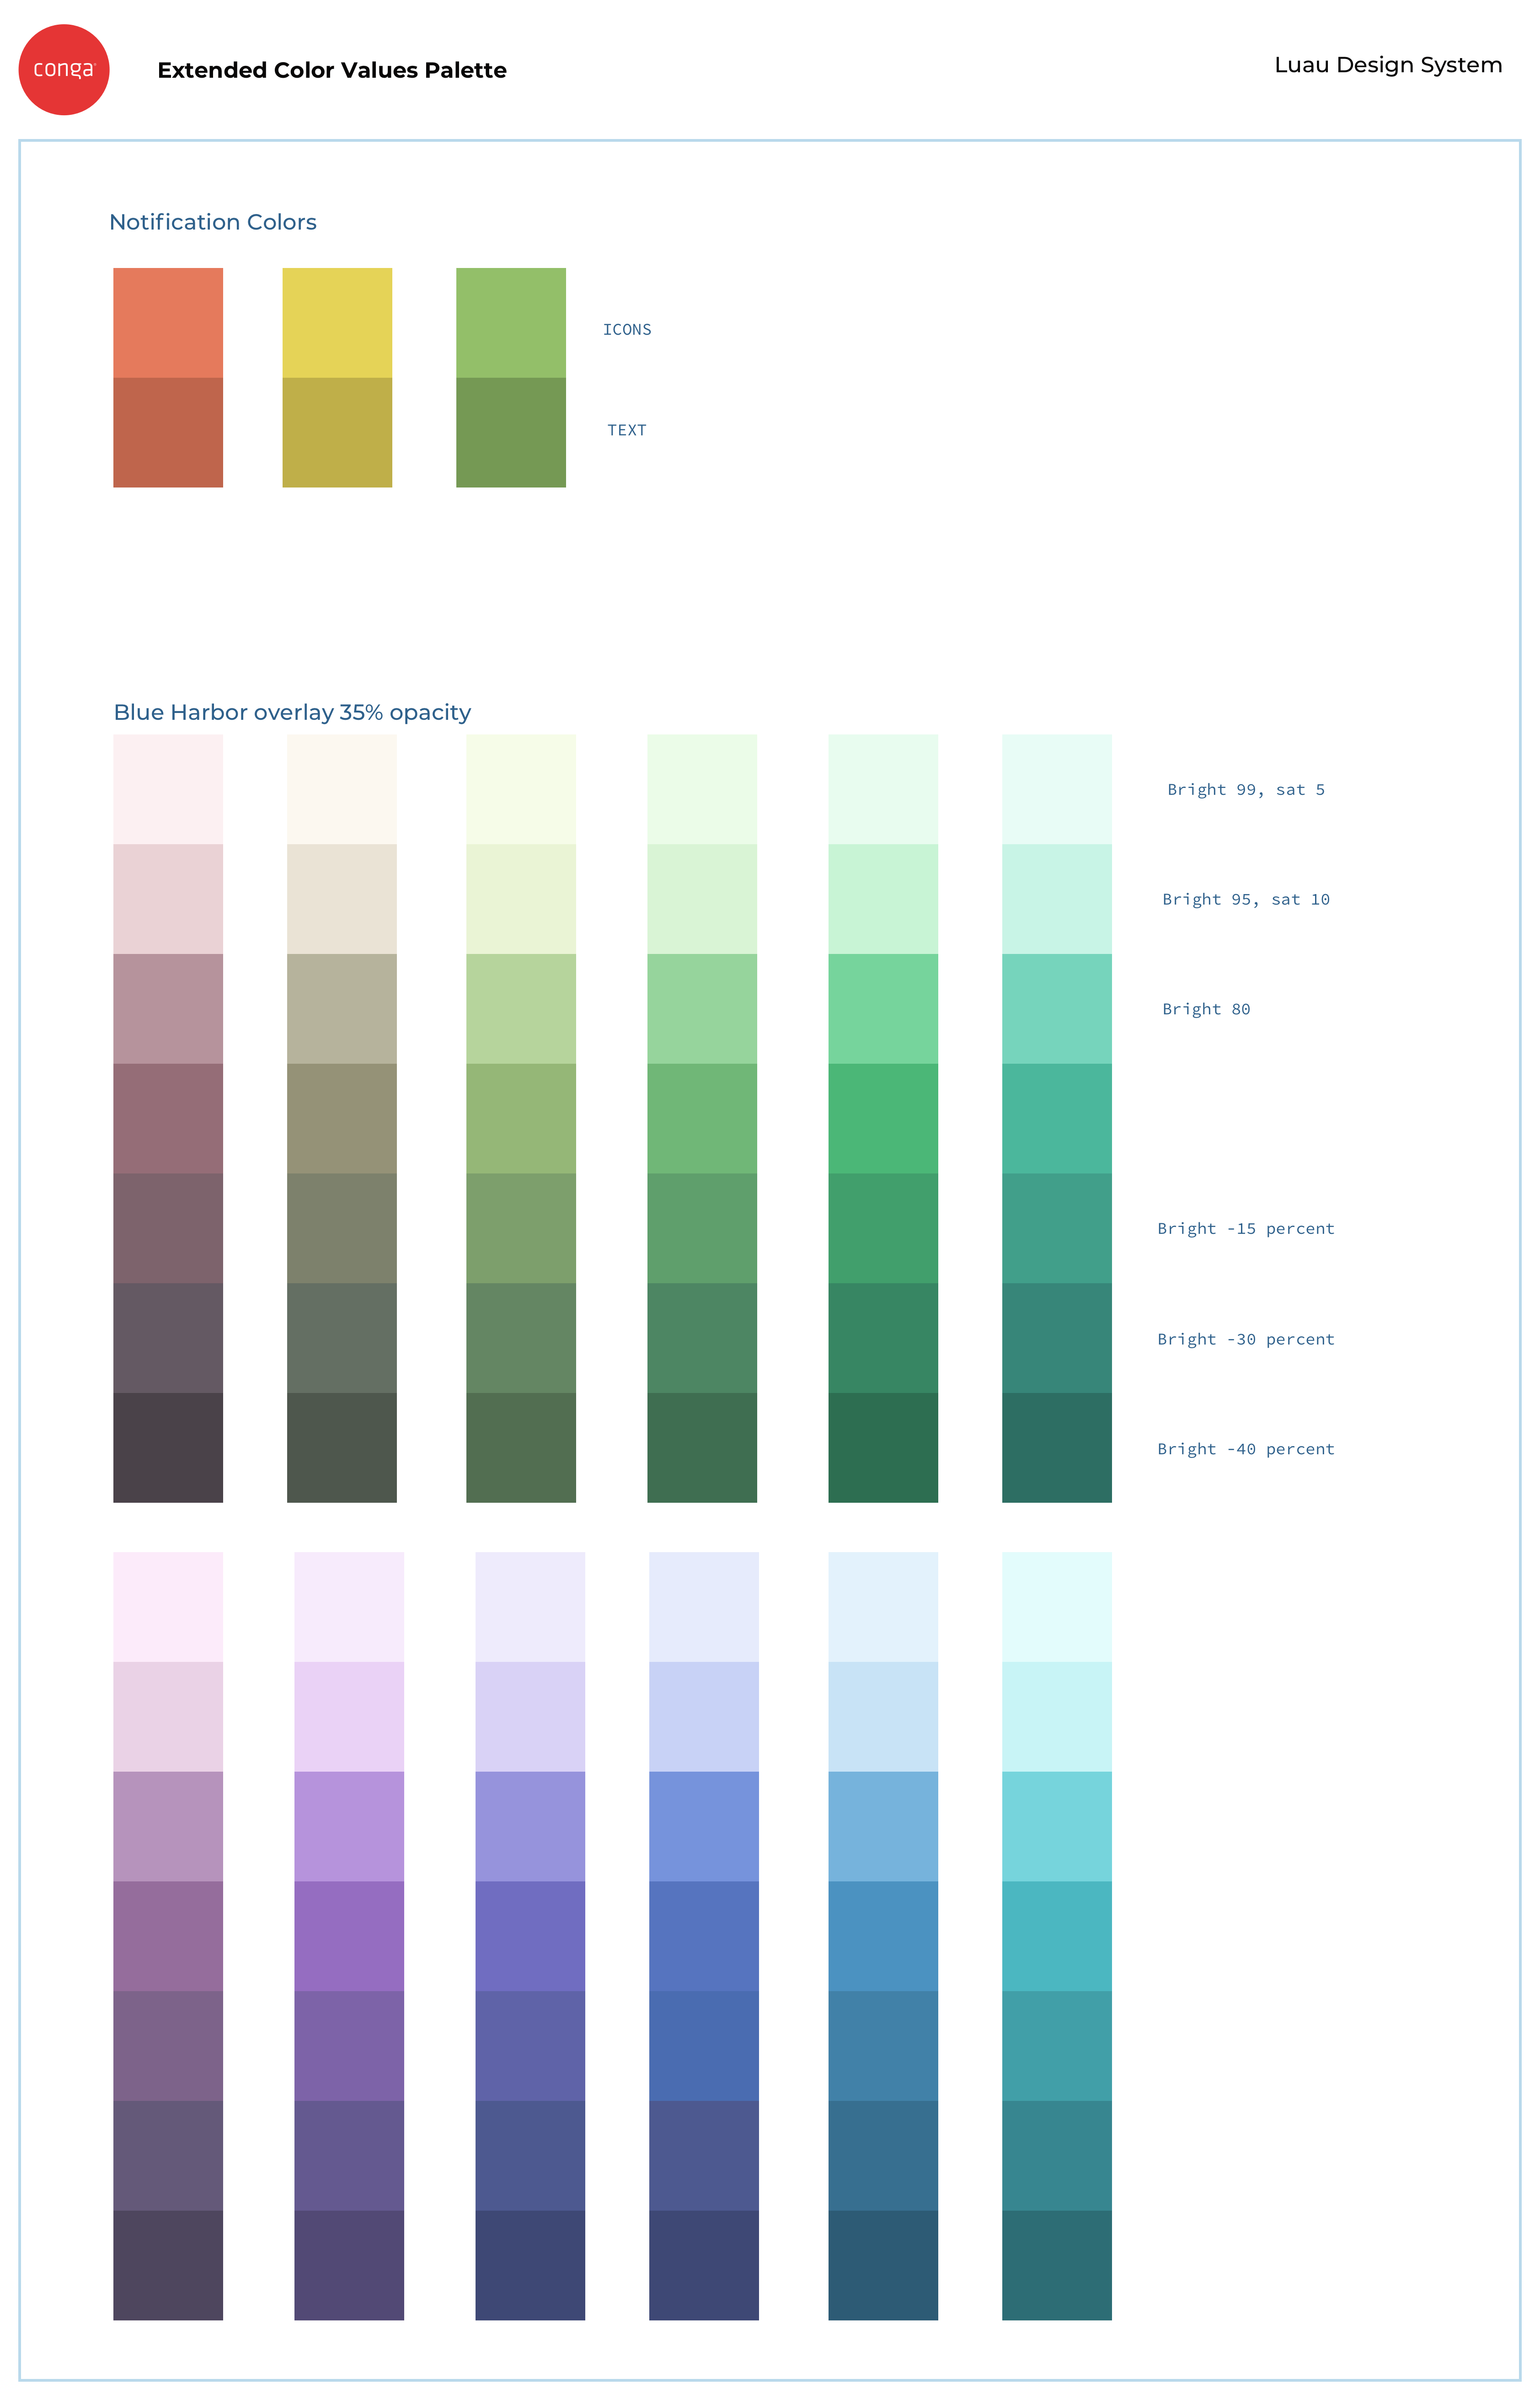 Extended color palette to be used by the Conga Luau Design System.  These are a full range of colors calculated off the base brand color specifications.